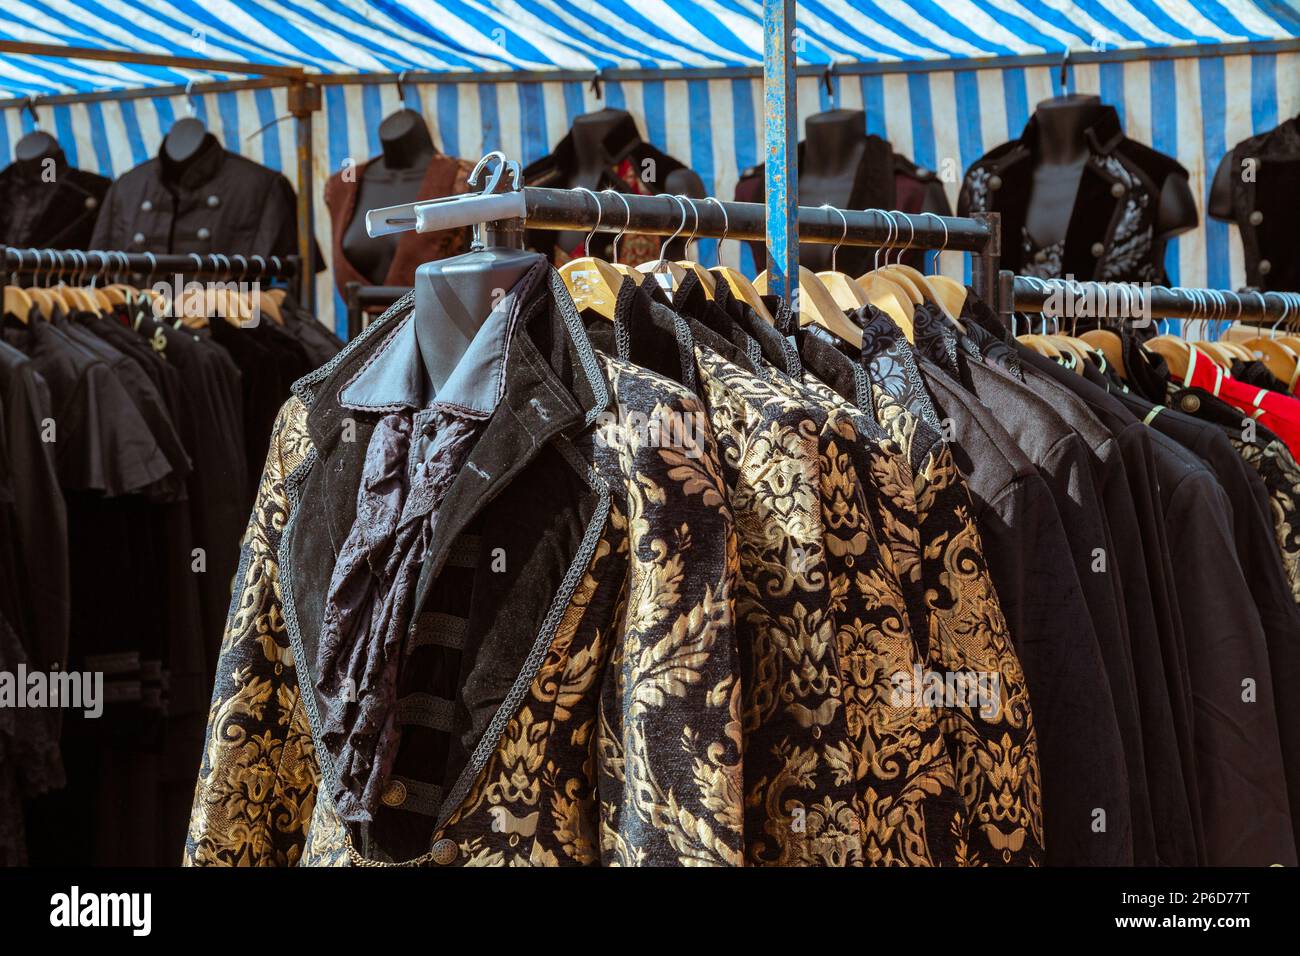 A market stall at a steampunks event selling steampunk clothing. Stock Photo